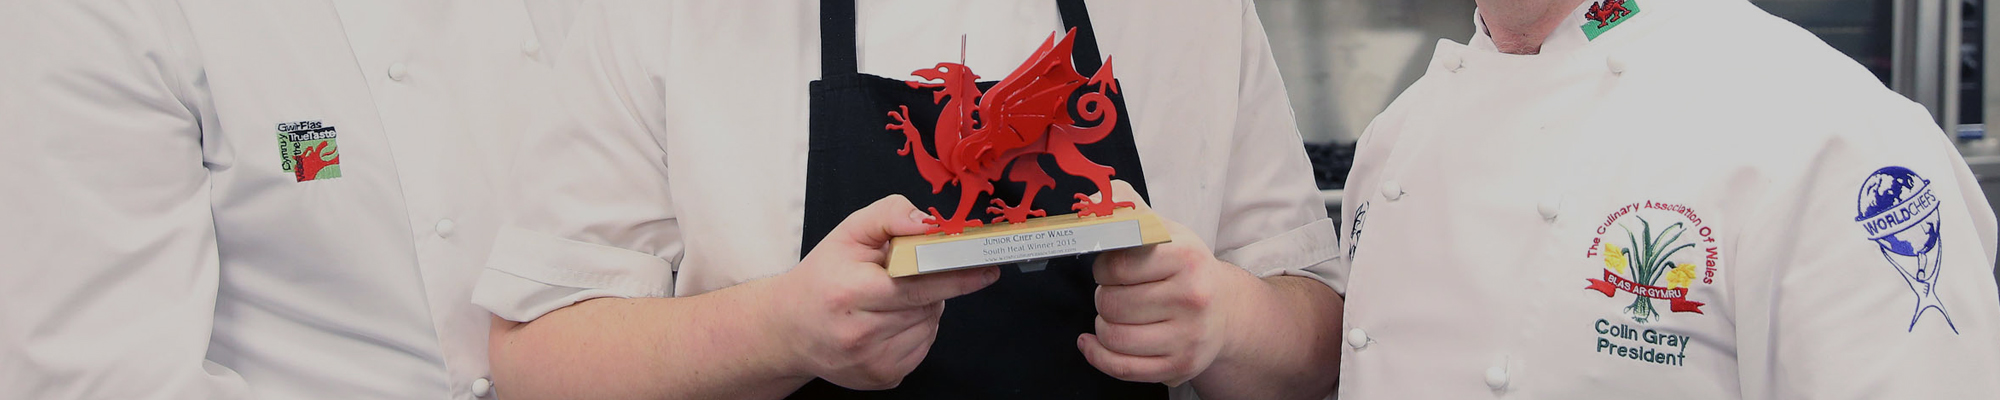 junior chef of wales welsh international culinary championships